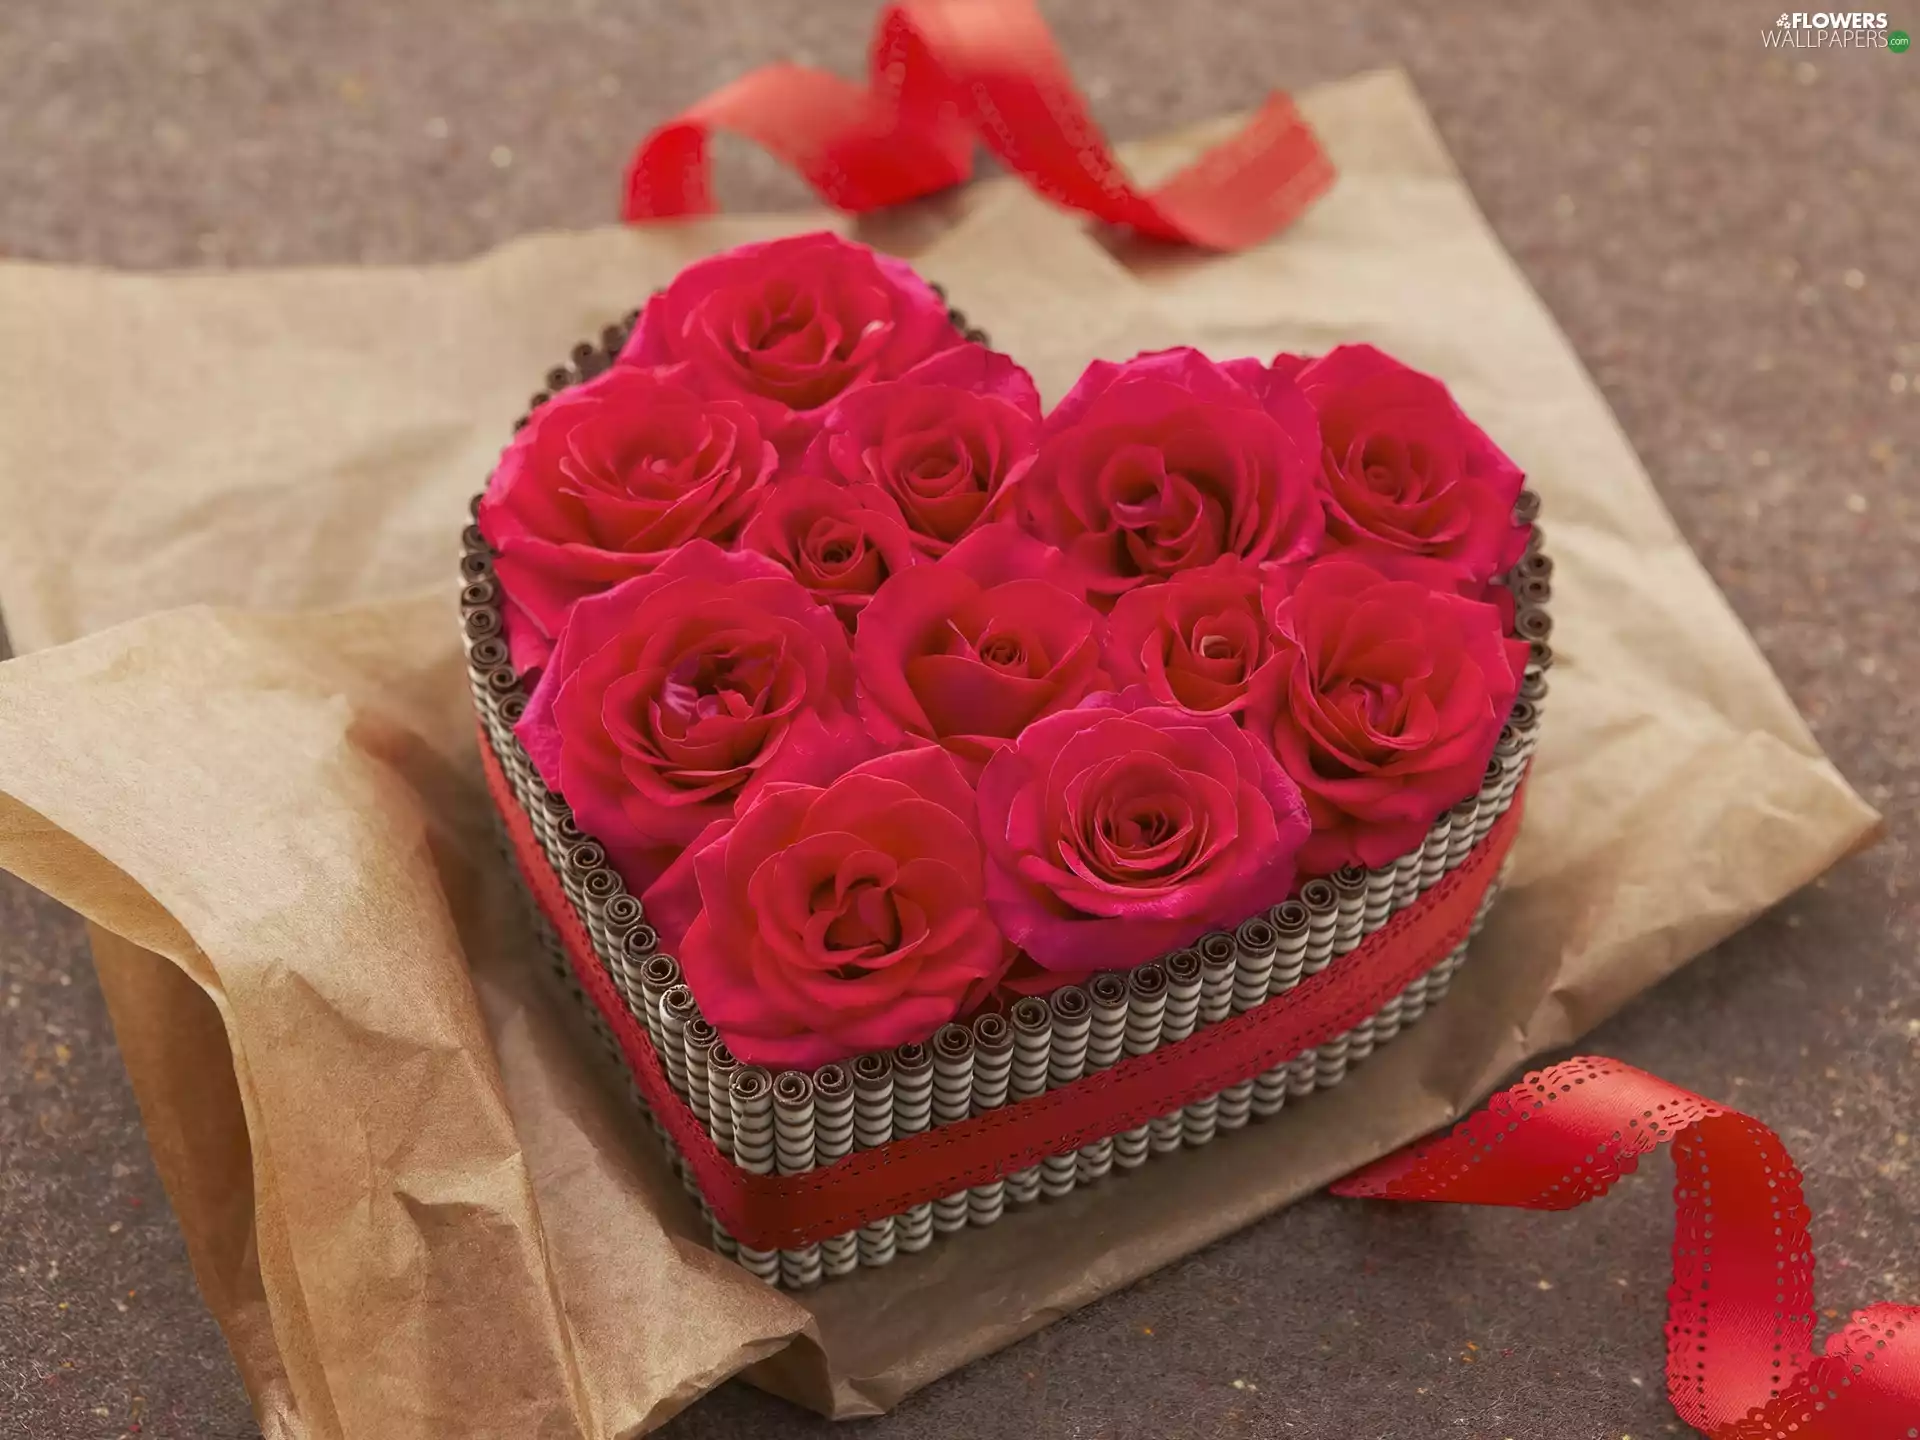 package, ribbon, Red, roses, Heart